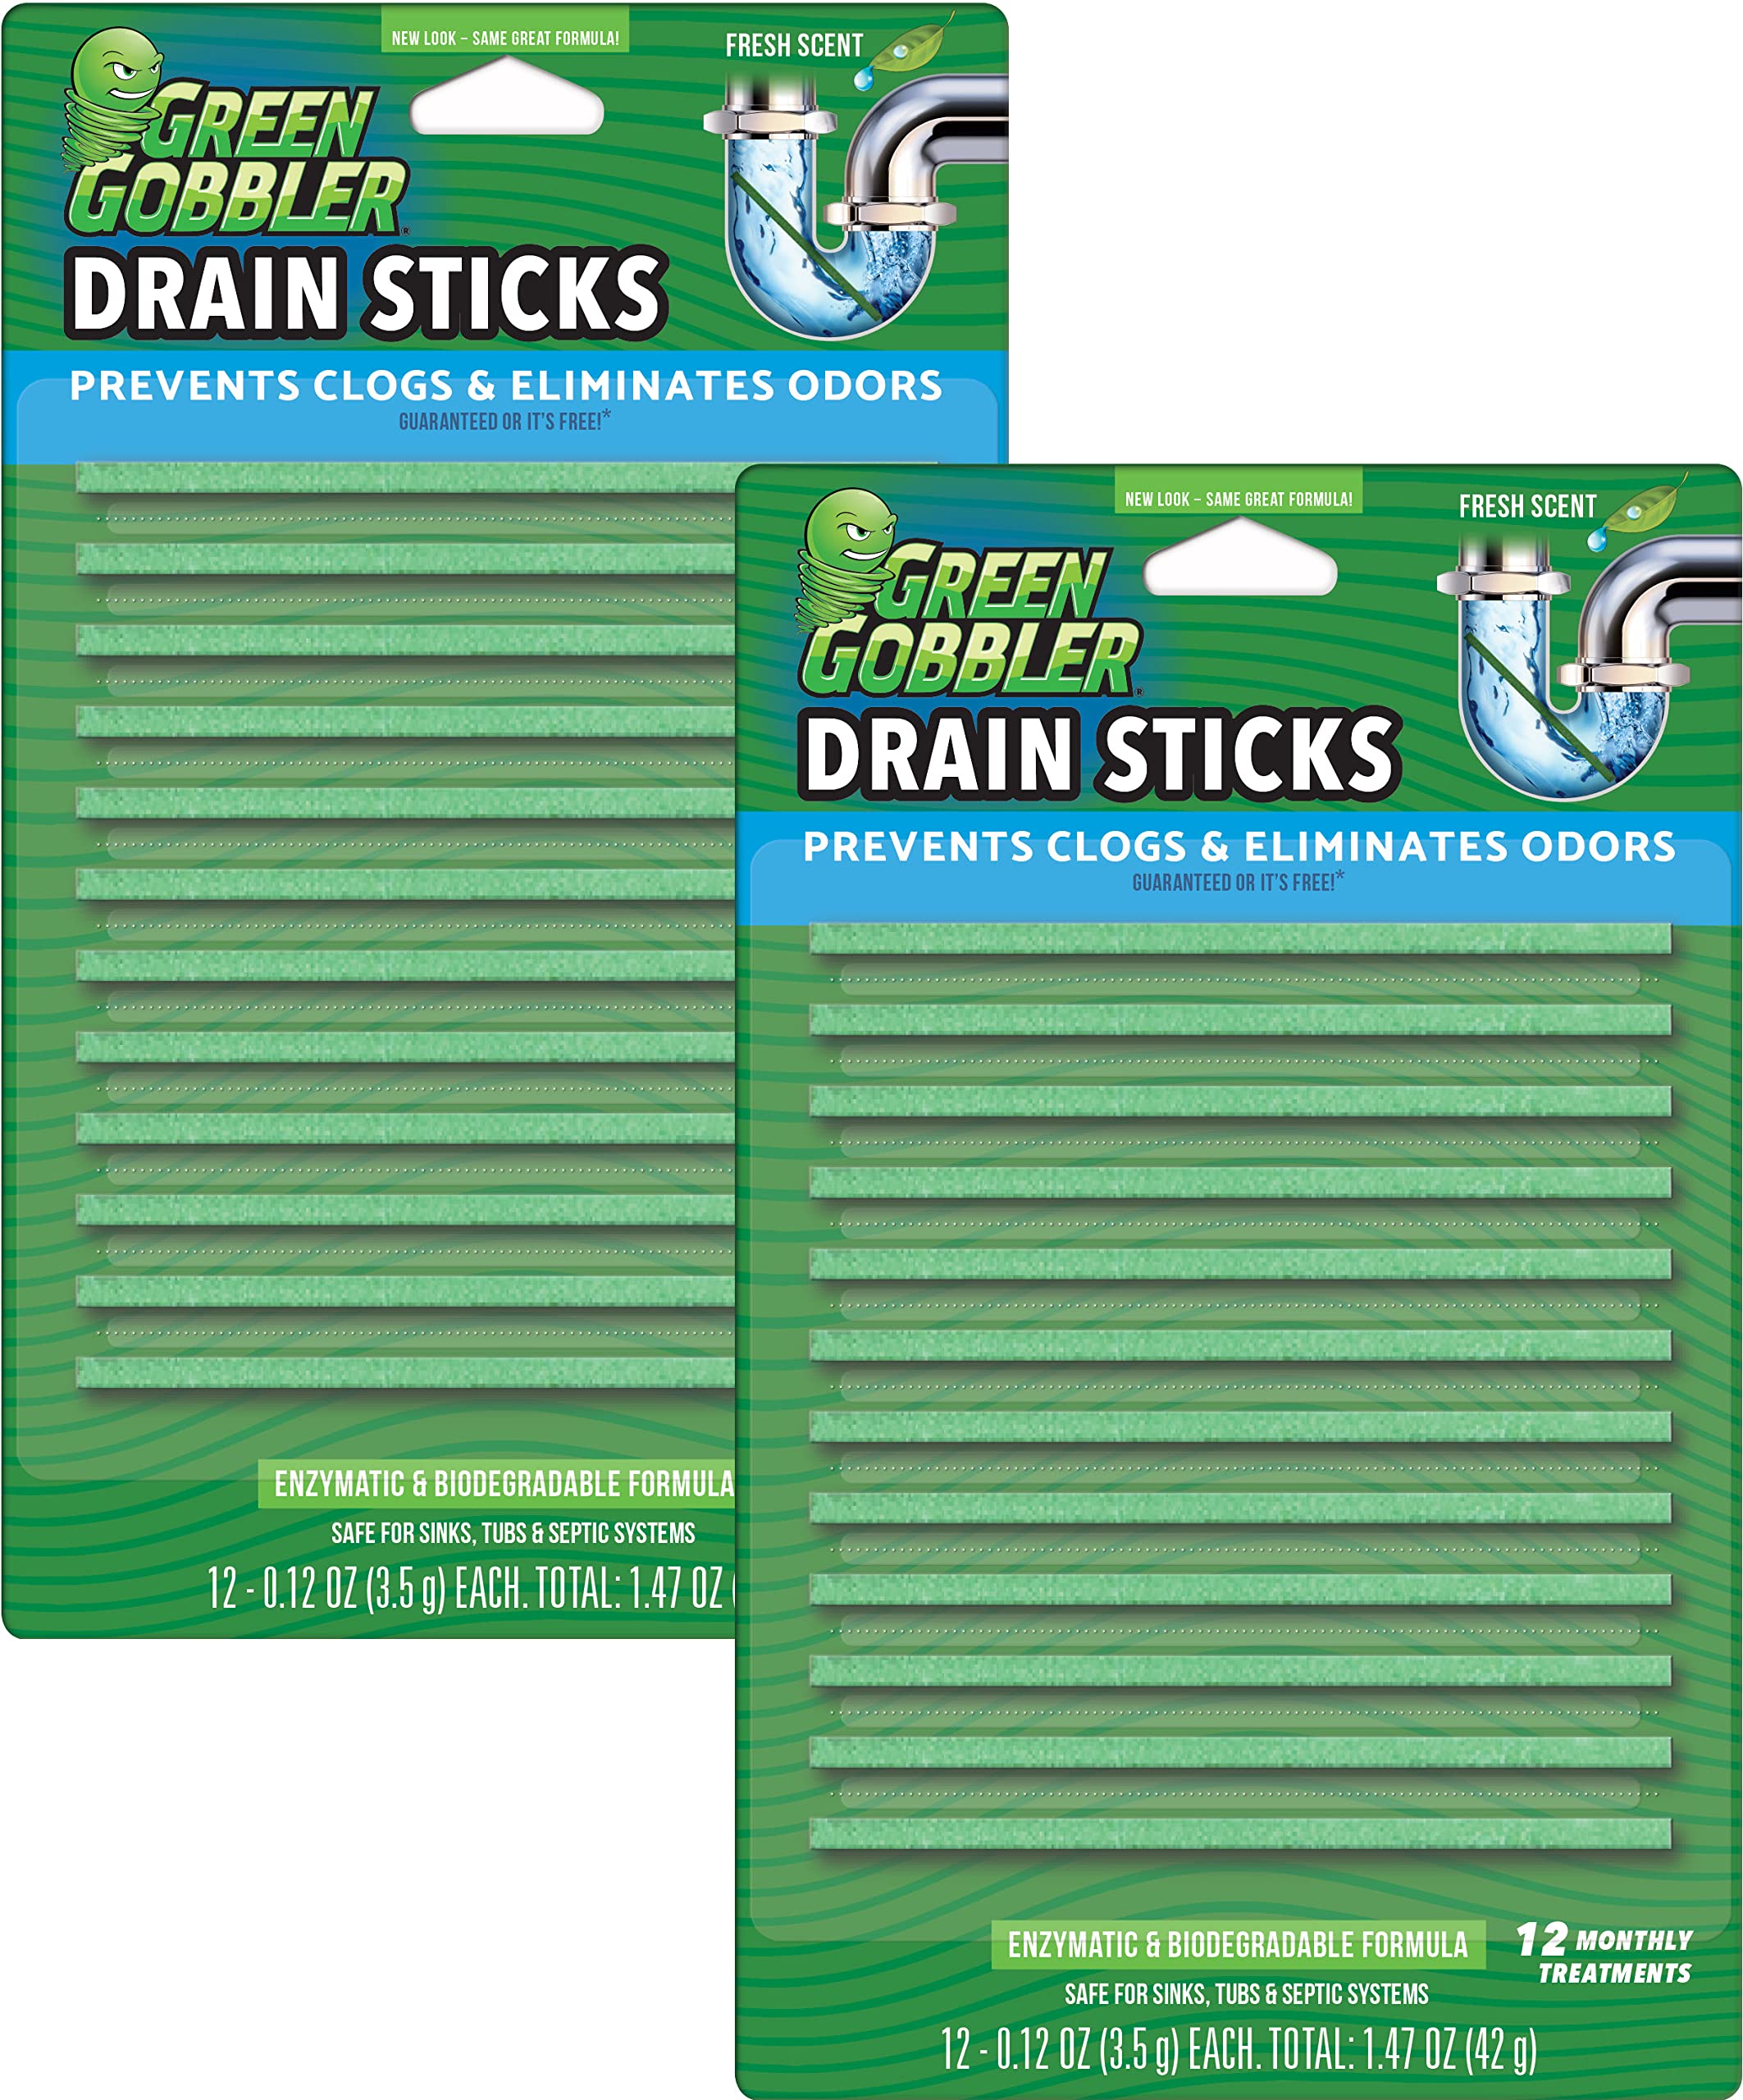 Book Cover Green Gobbler Drain Cleaner & Deodorizer FRESH SCENT Sticks for Toilet Tanks, Sinks, Bathtub Drains, Washing Machine Drains and Garbage Disposals - 24 Pieces